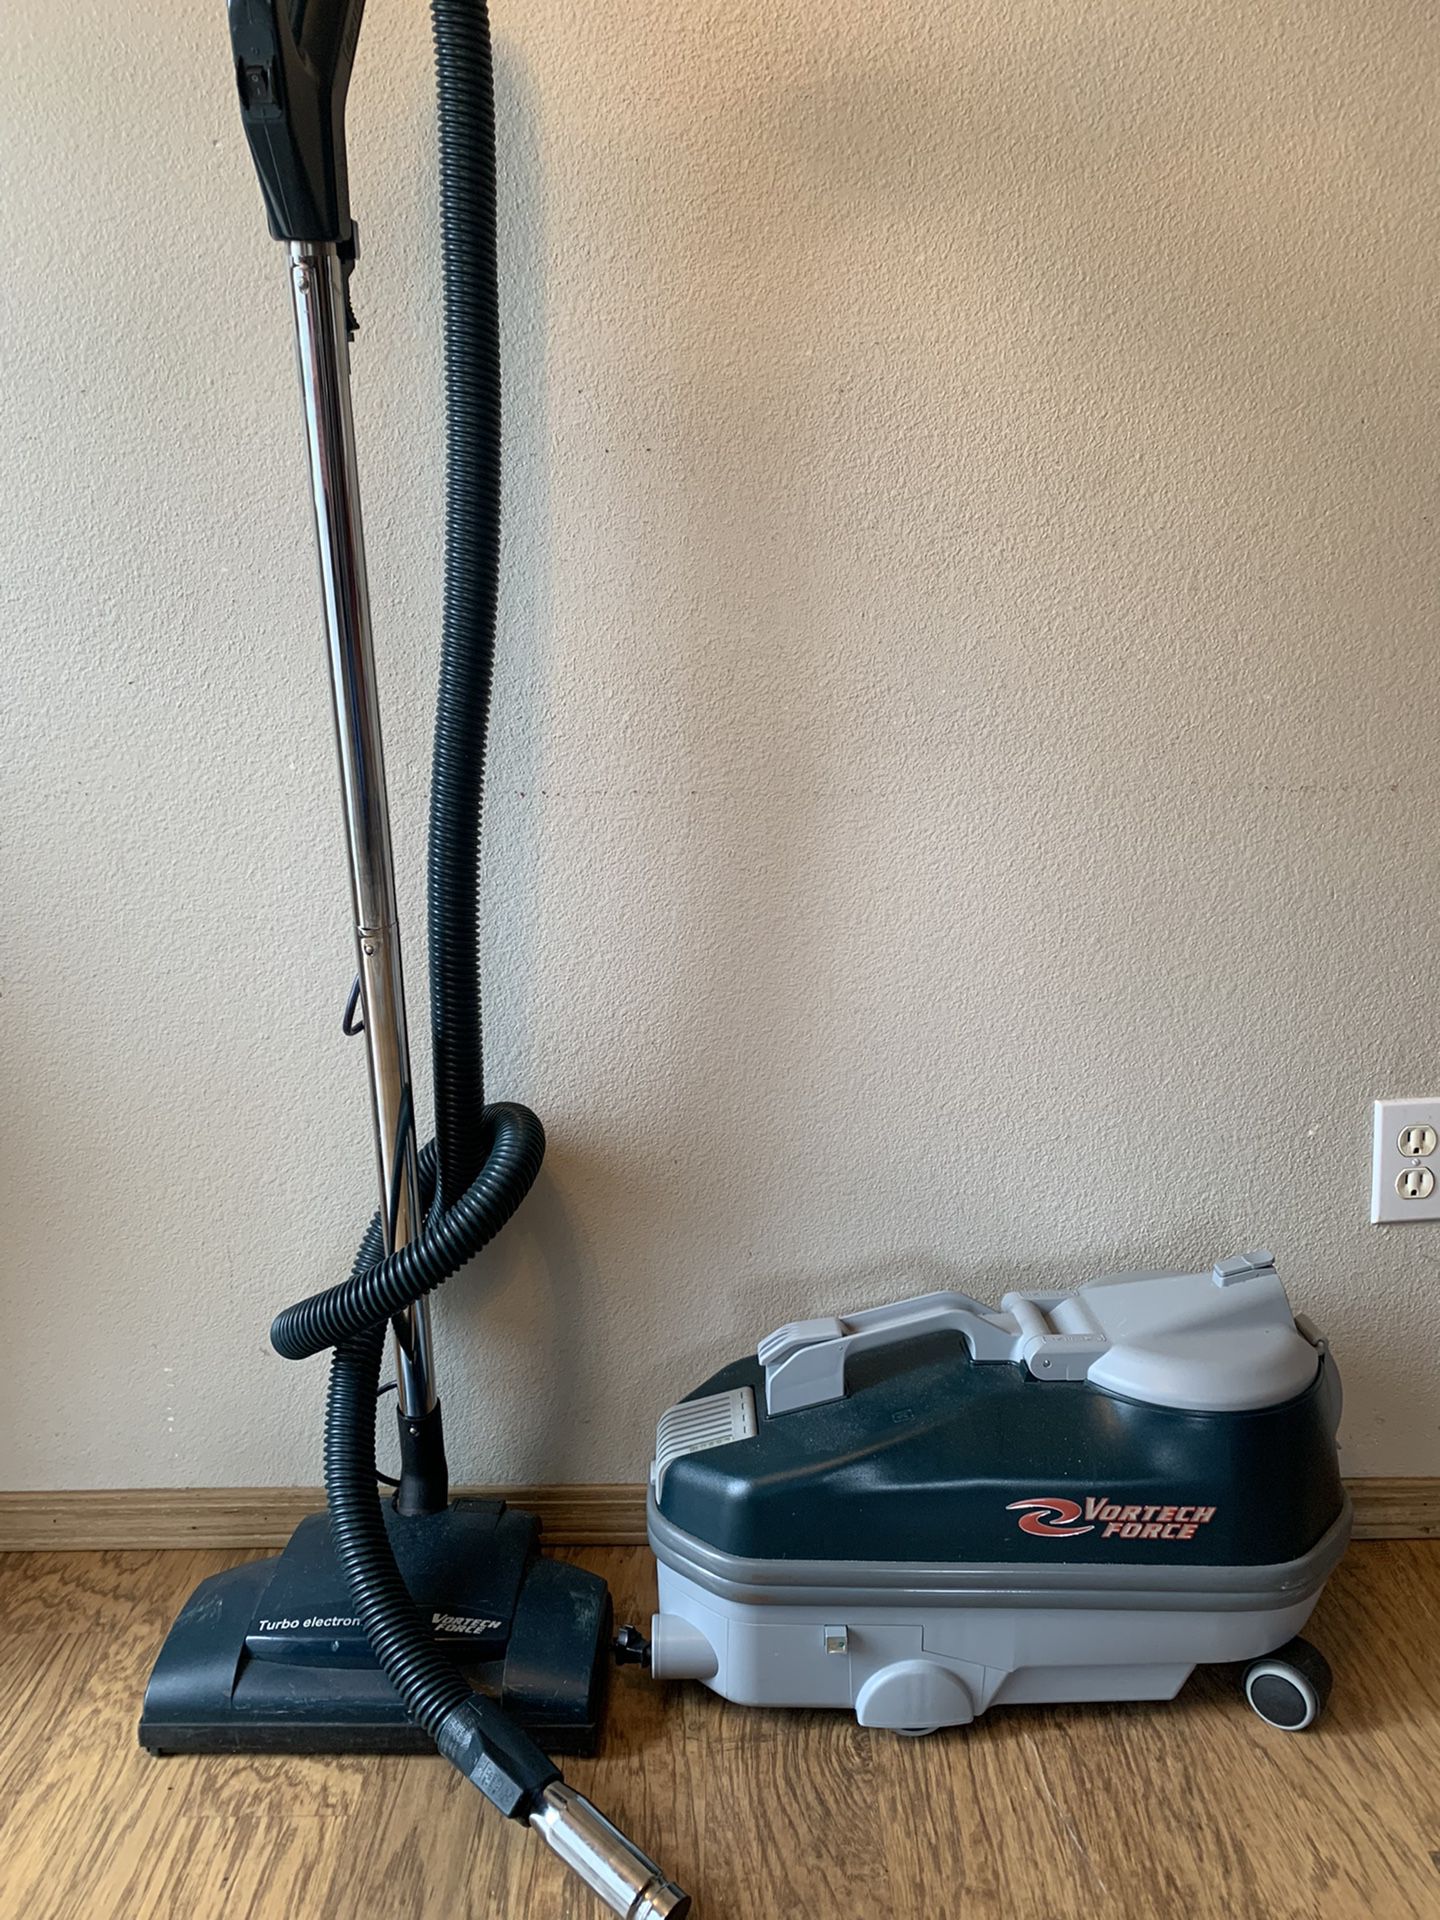 Vortech Force Canister Vacuum 